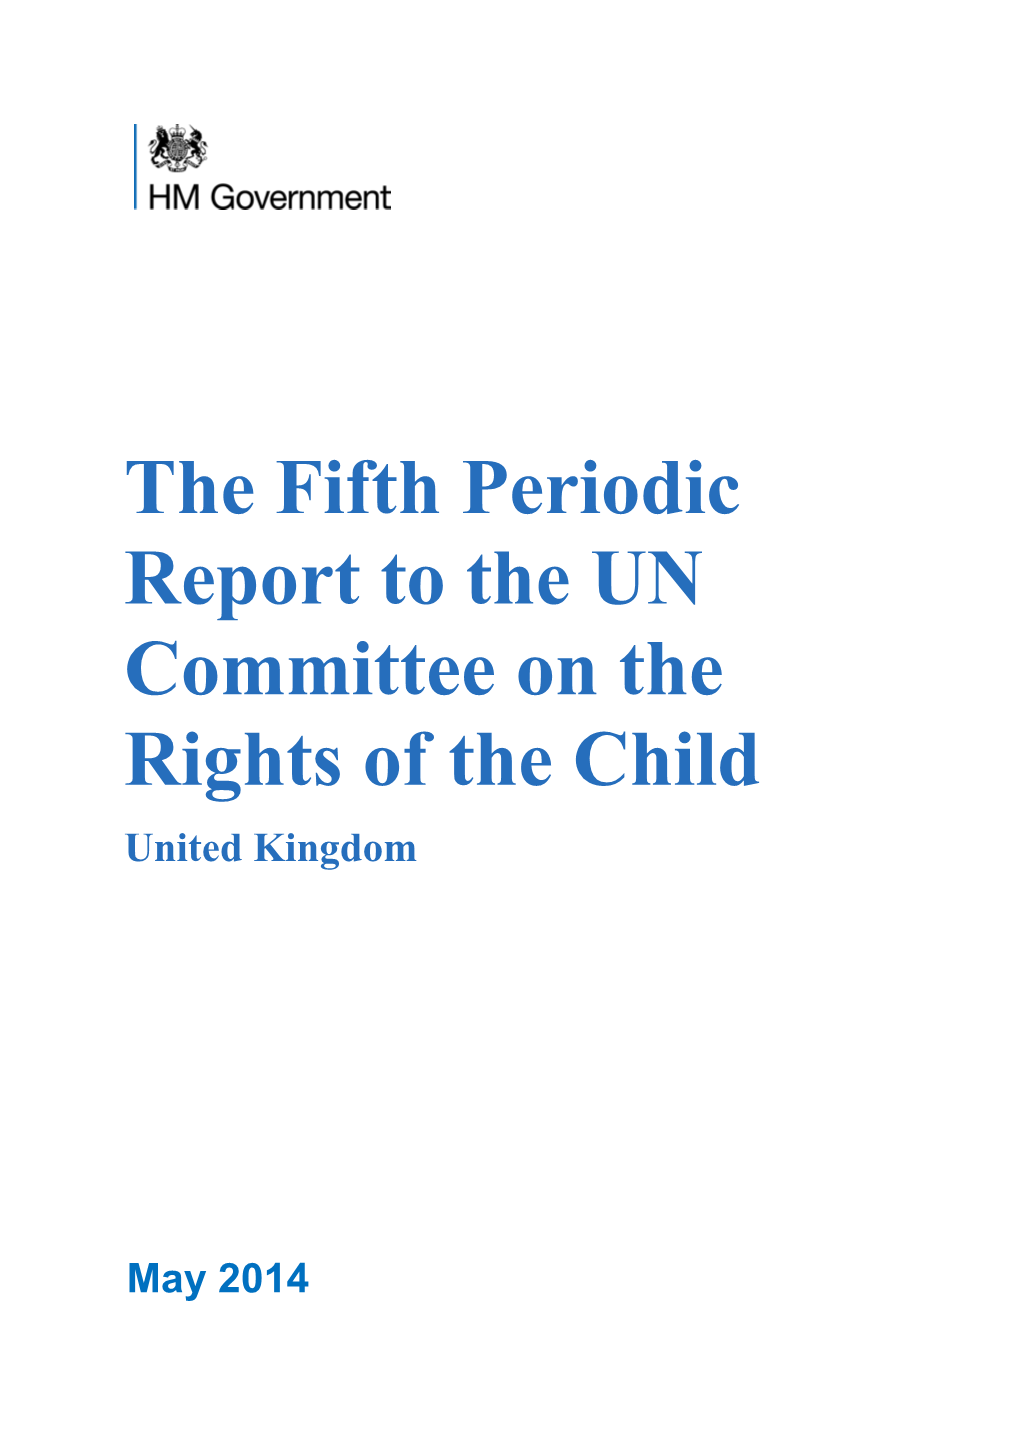 The Fifth Periodic Report to the UN Committee on the Rights of the Child United Kingdom